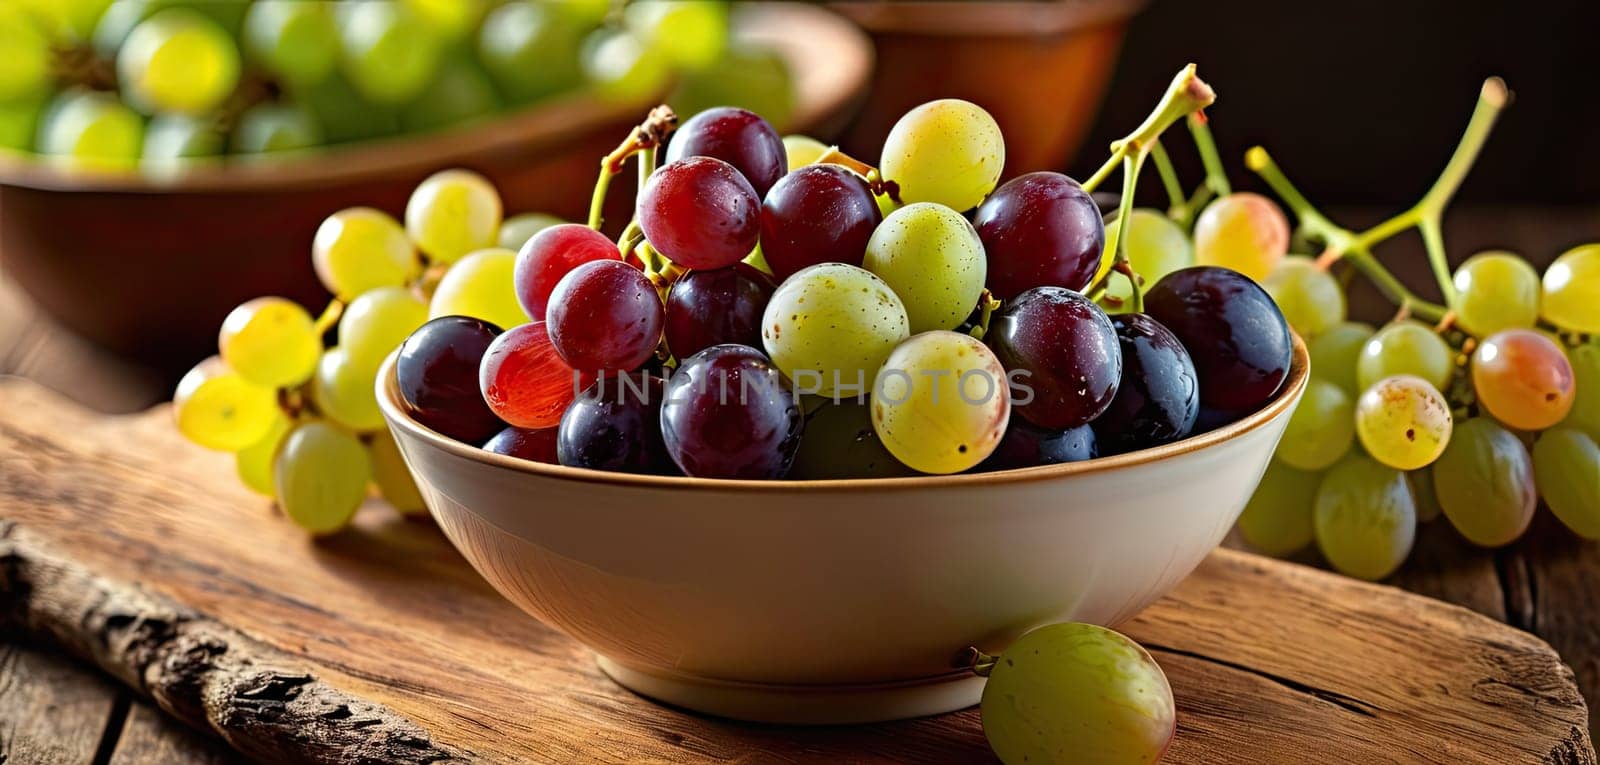 Grapes in bowl on wooden table